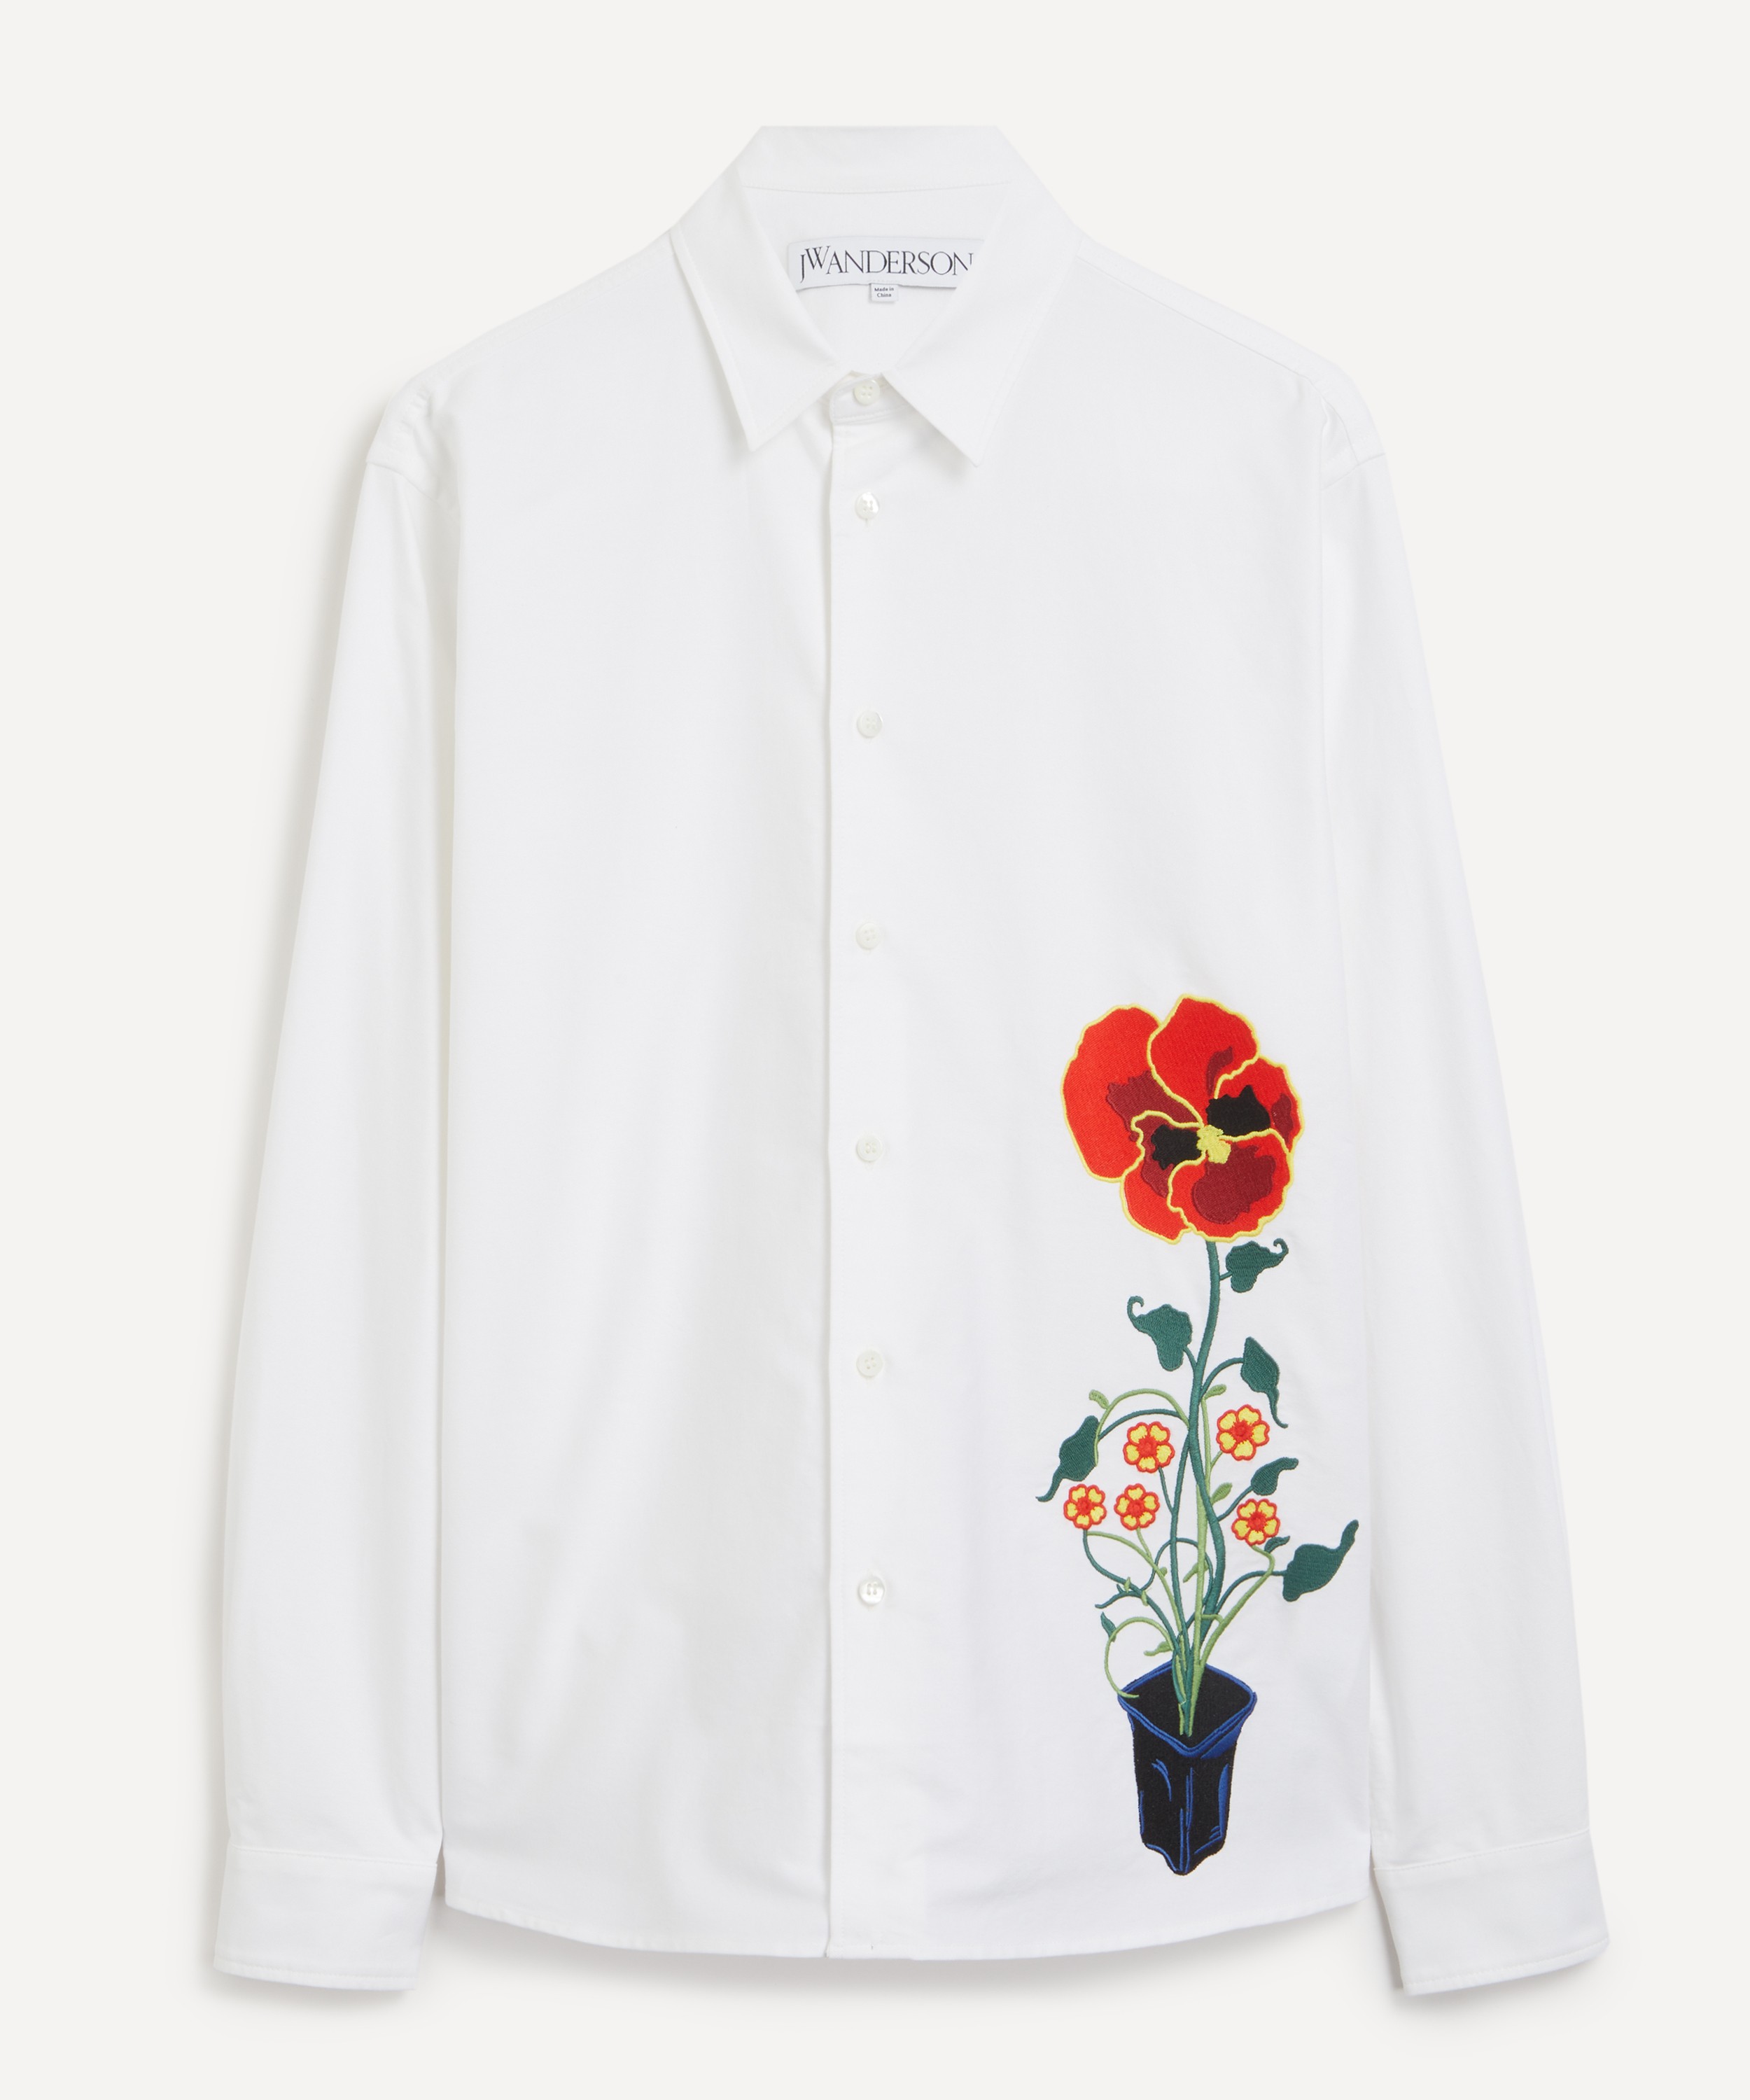 JW Anderson - Flower Pot Embroidery Shirt